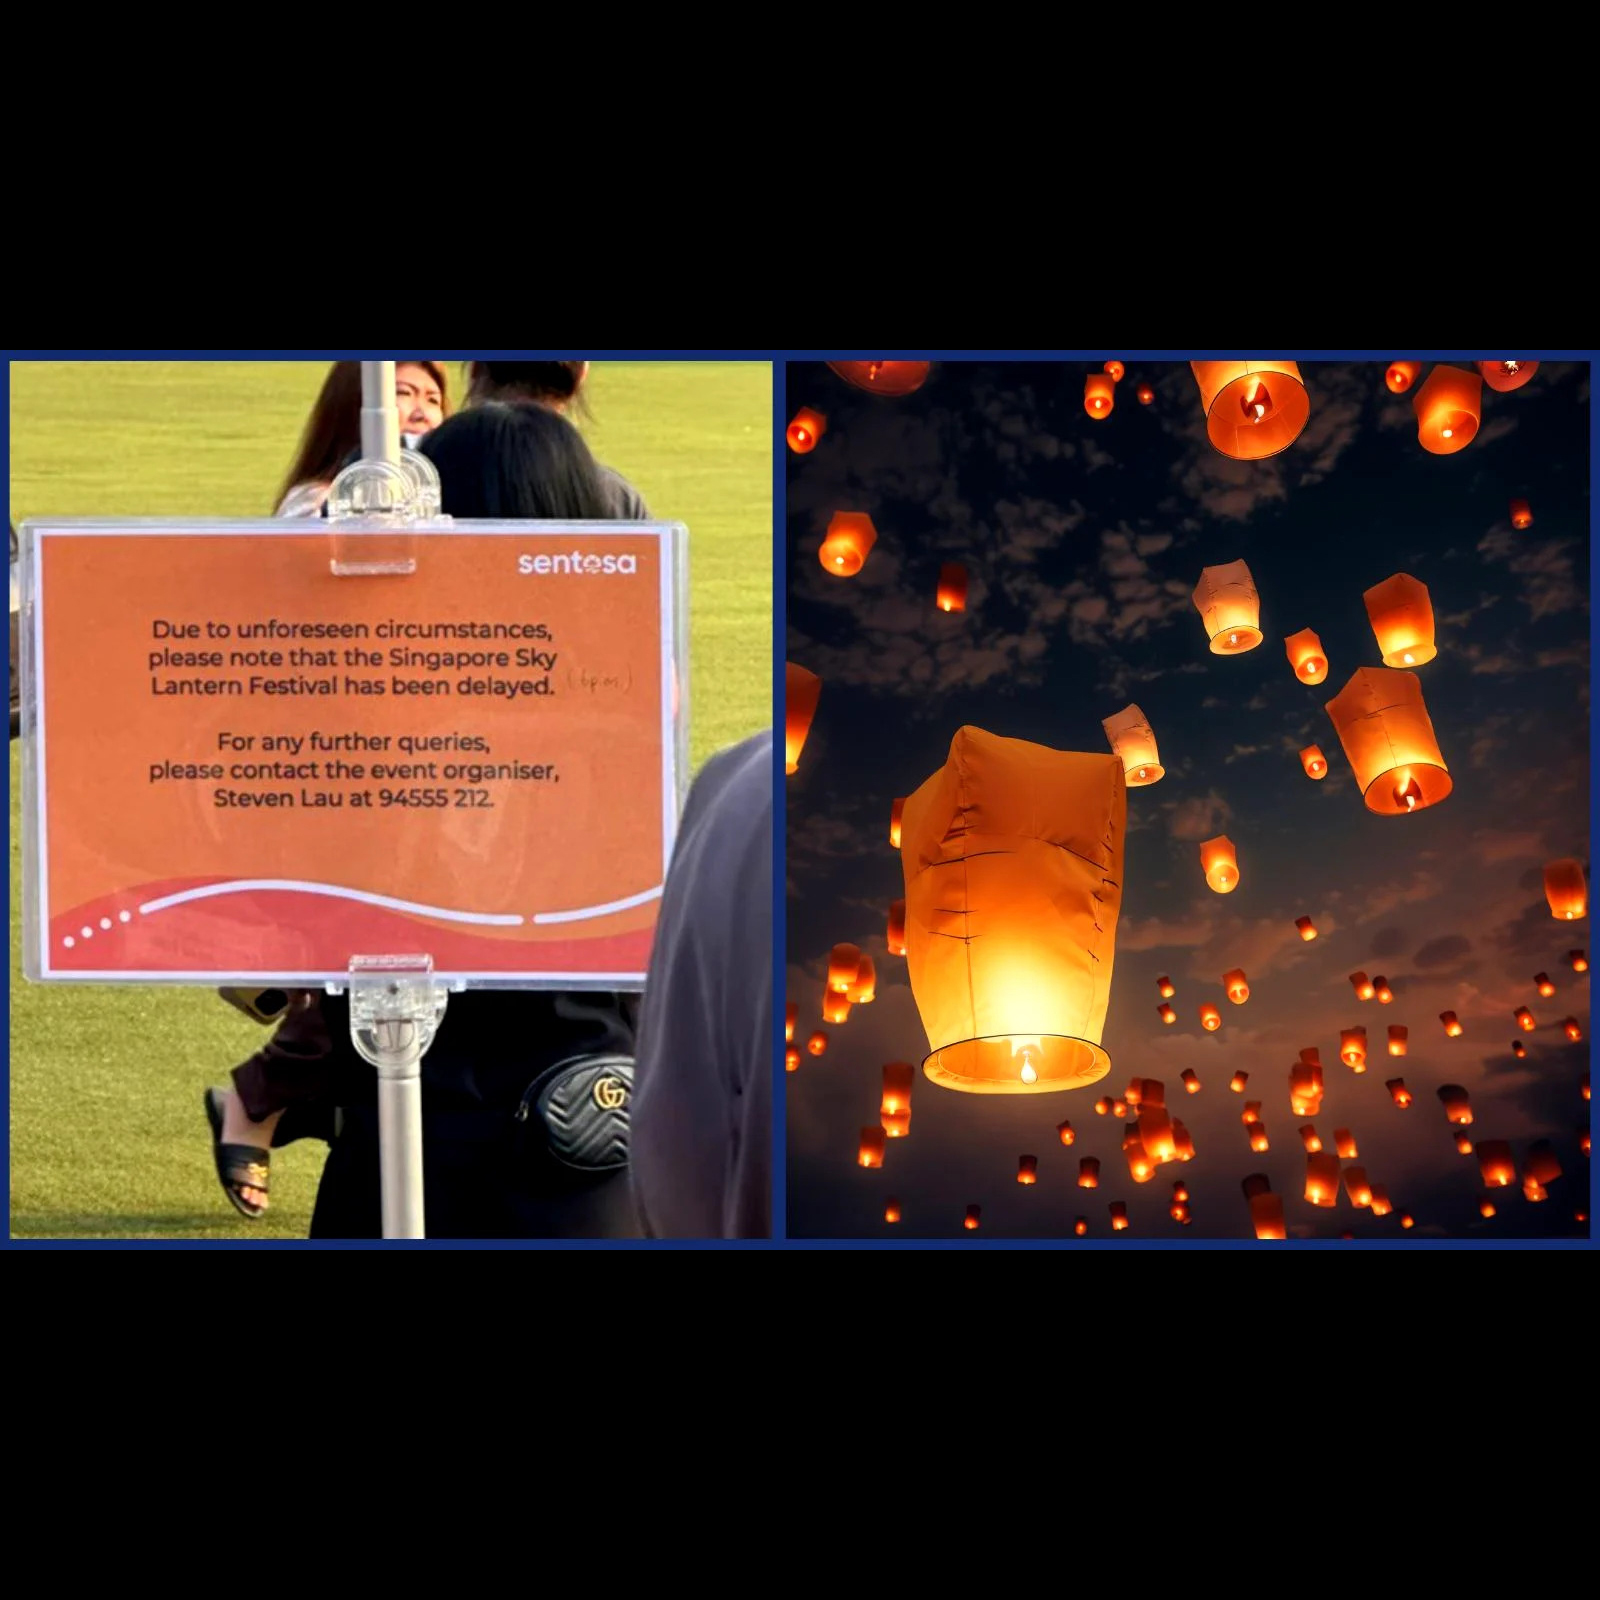 3 lessons brands can learn from Sentosa’s sky lantern fiasco